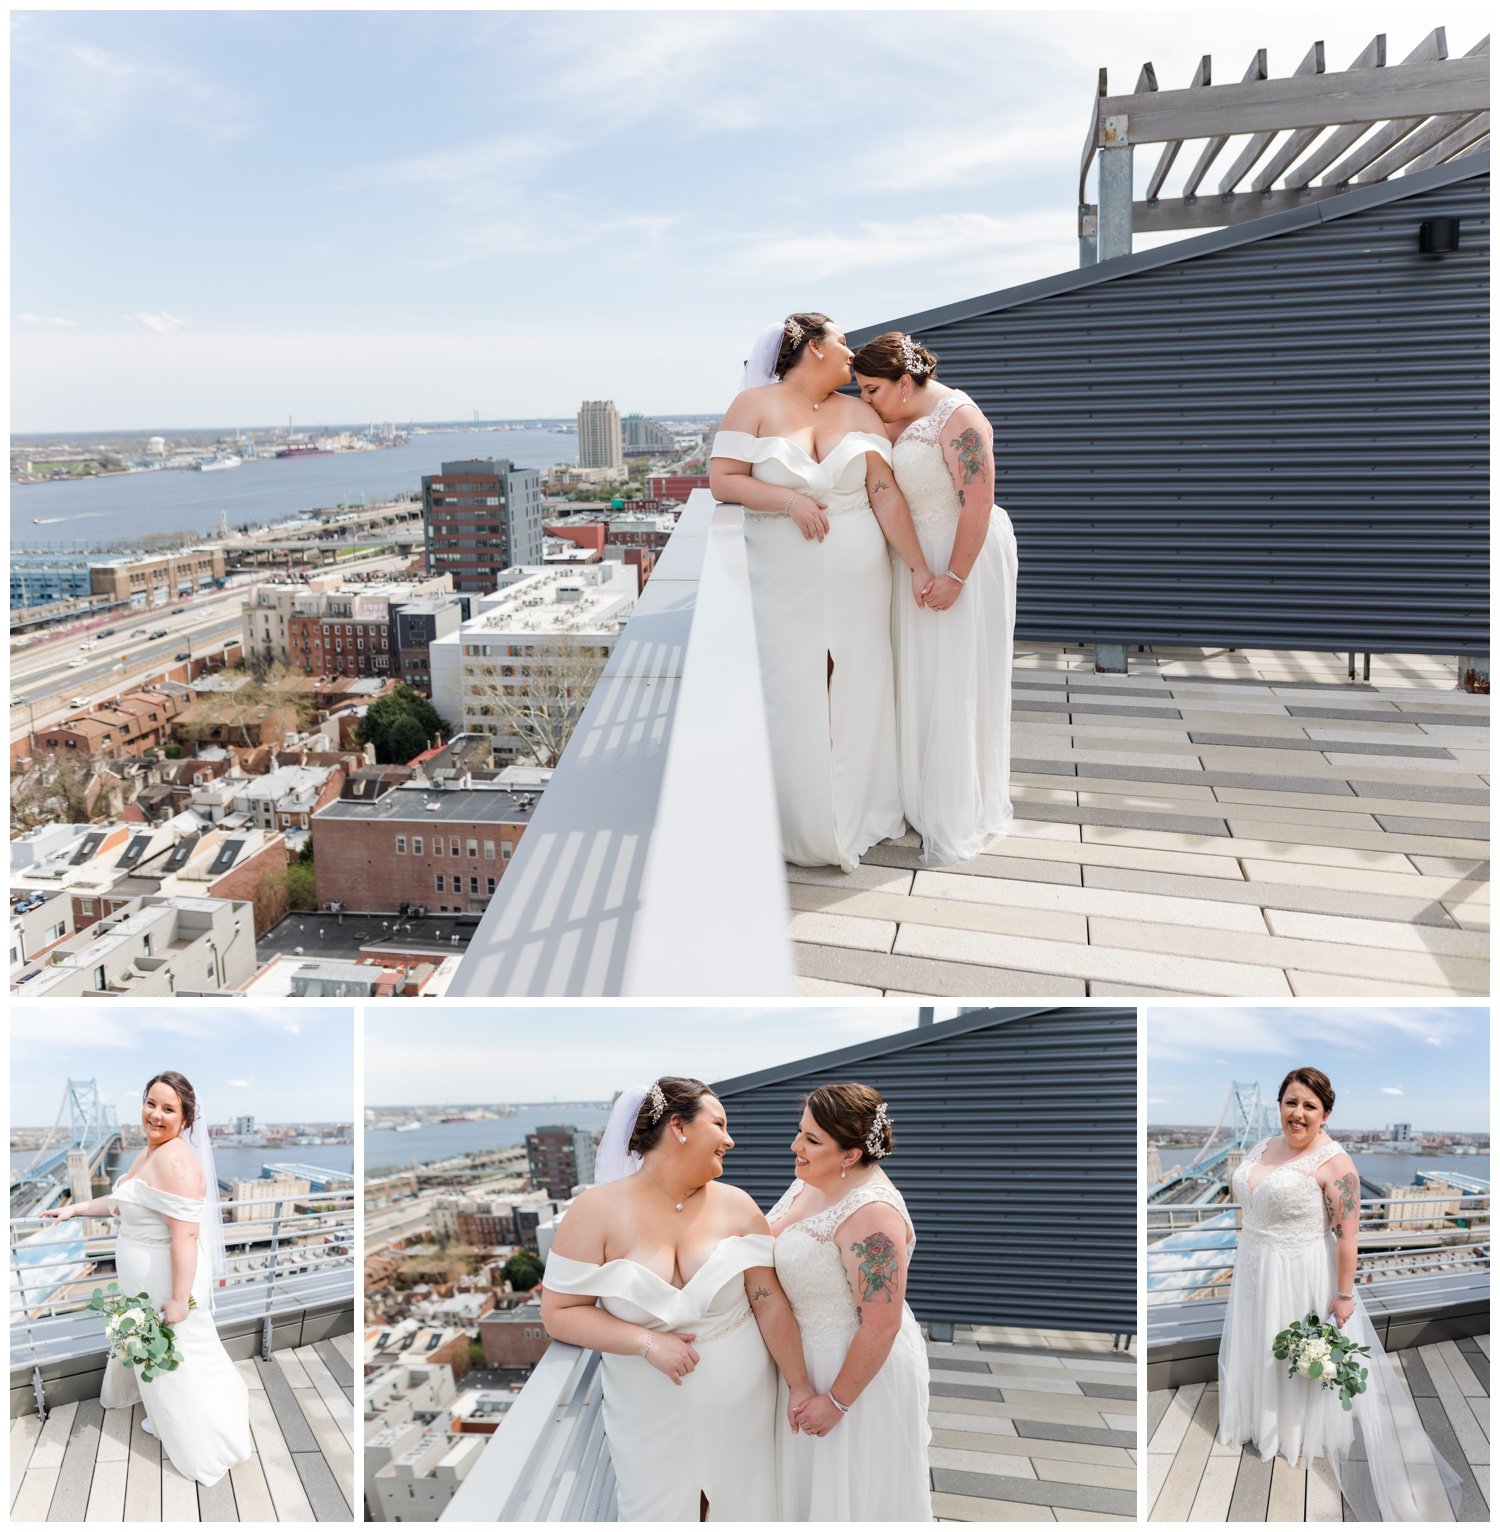 Race-Street-Pier-and-Yards-Brewing-Compnay-Philly-LGBT-Wedding-12.jpg